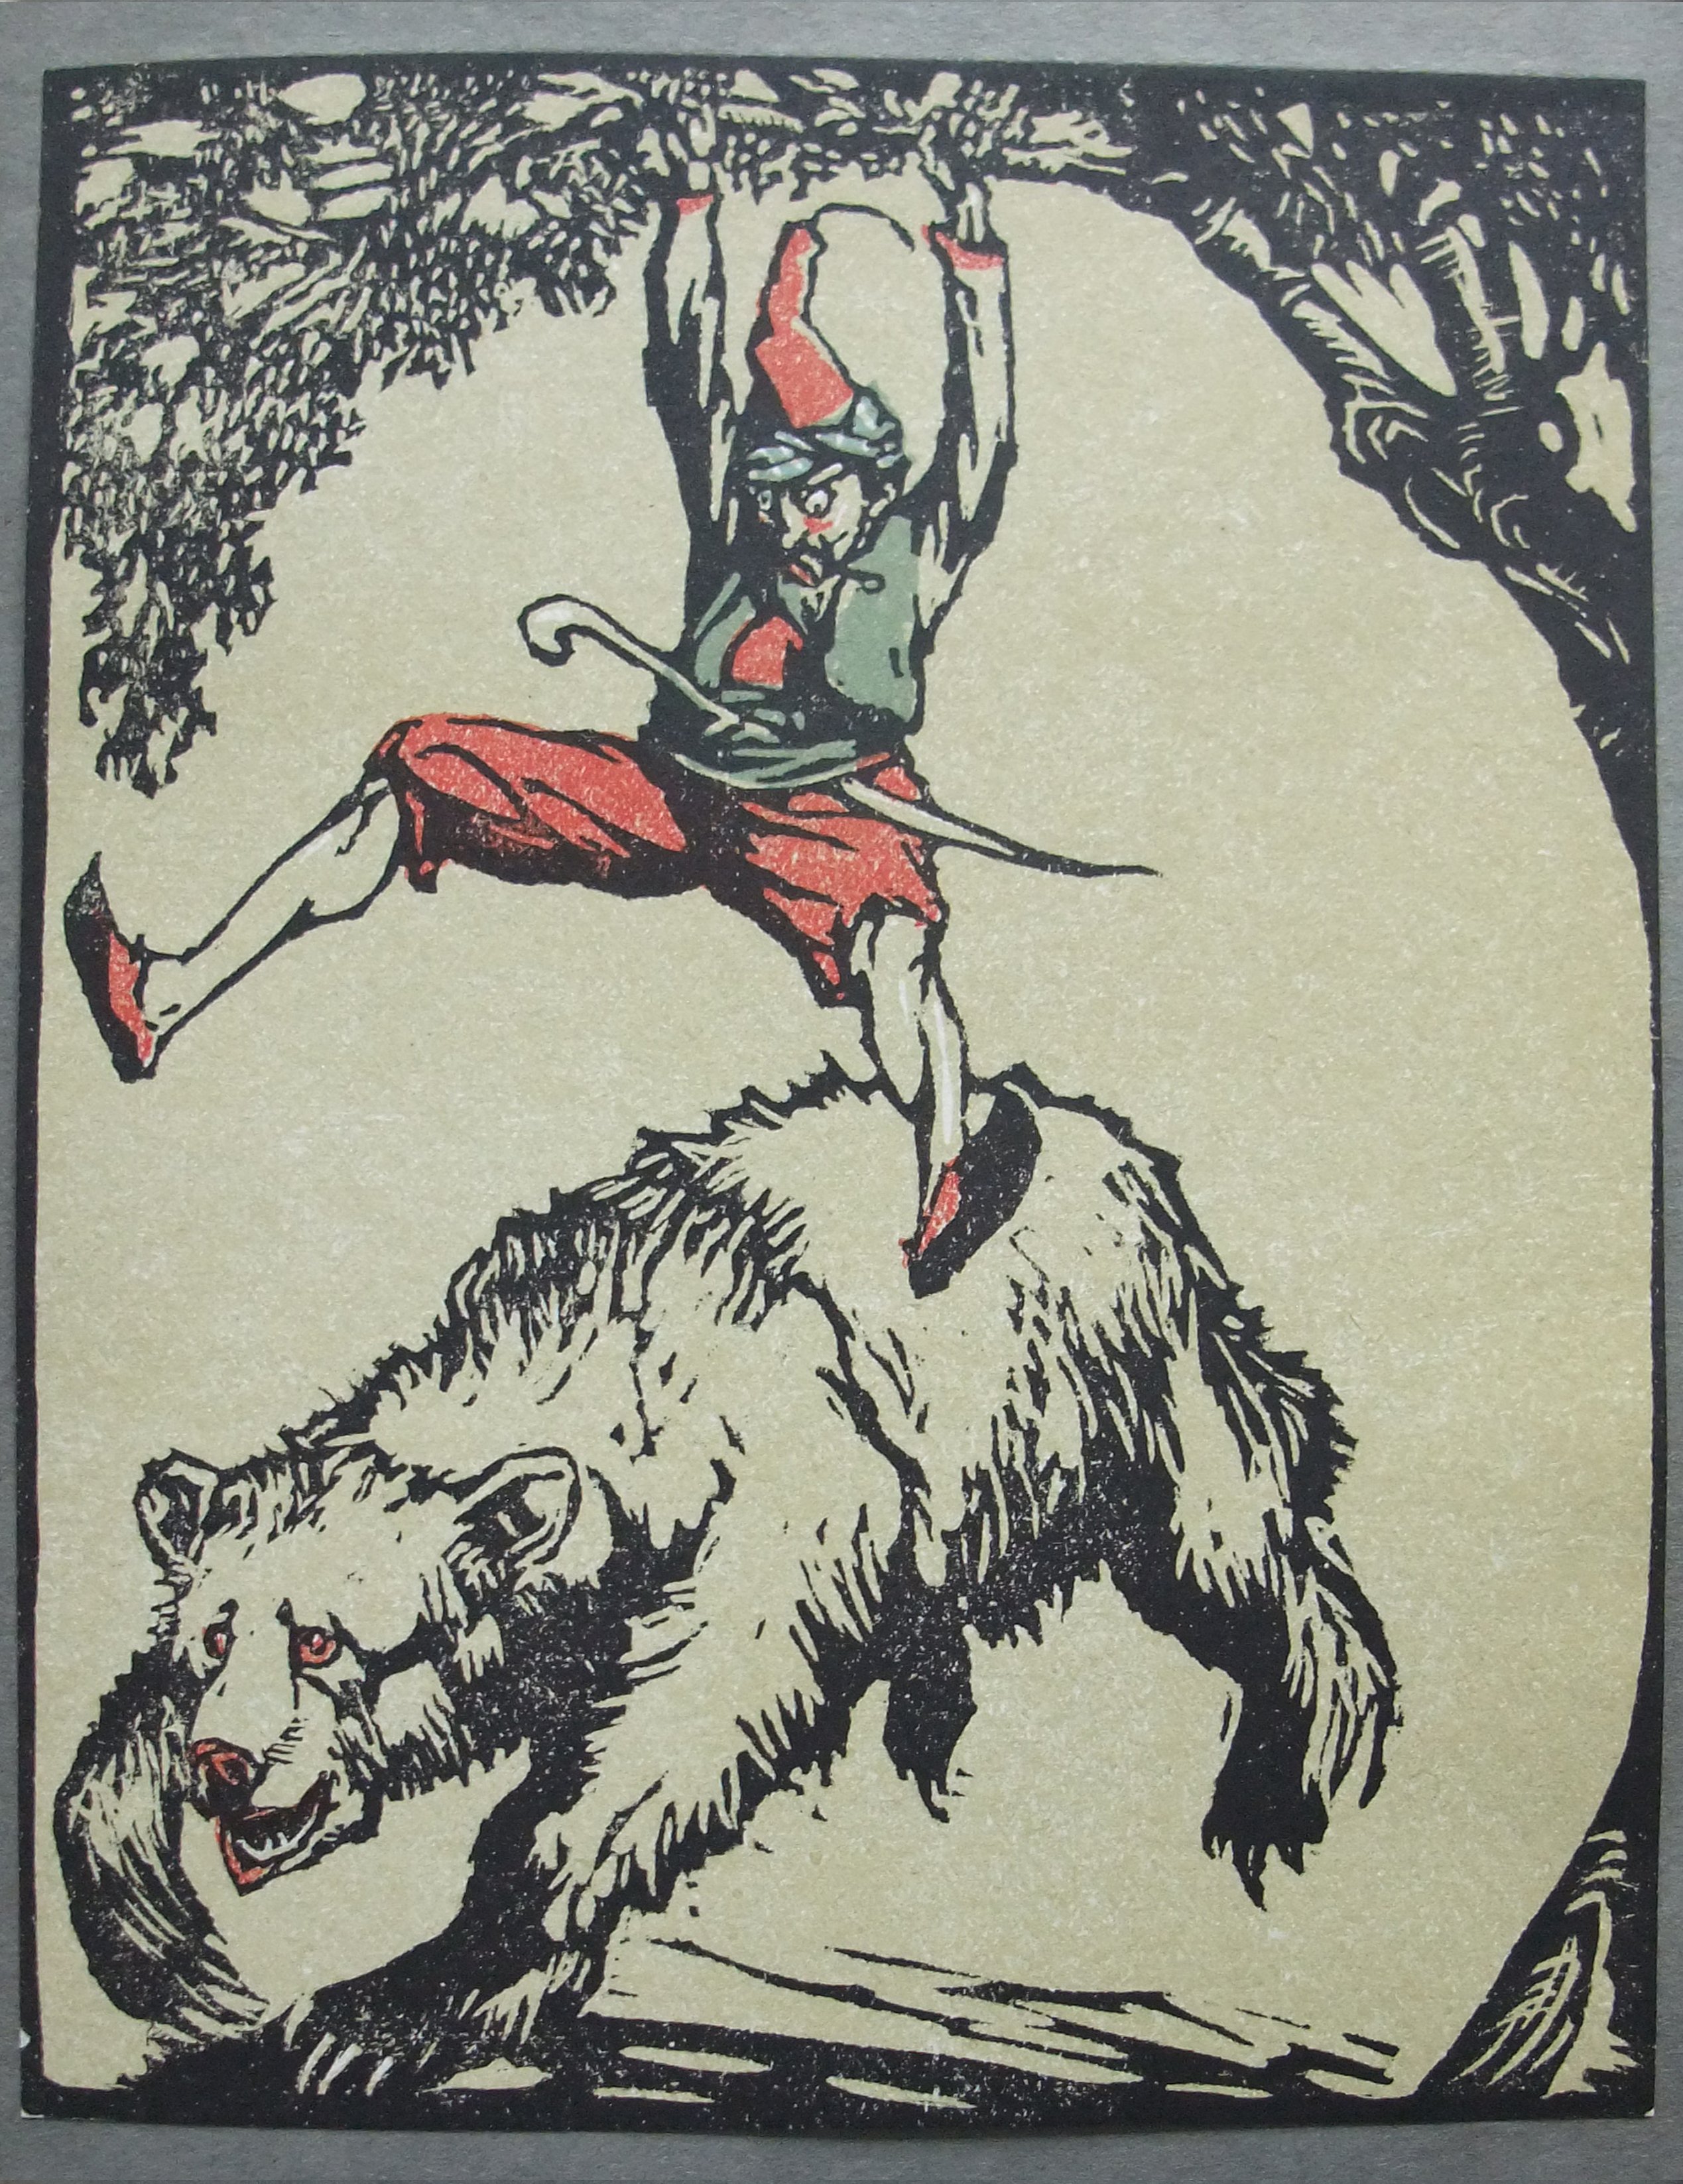 man hanging from tree above a bear